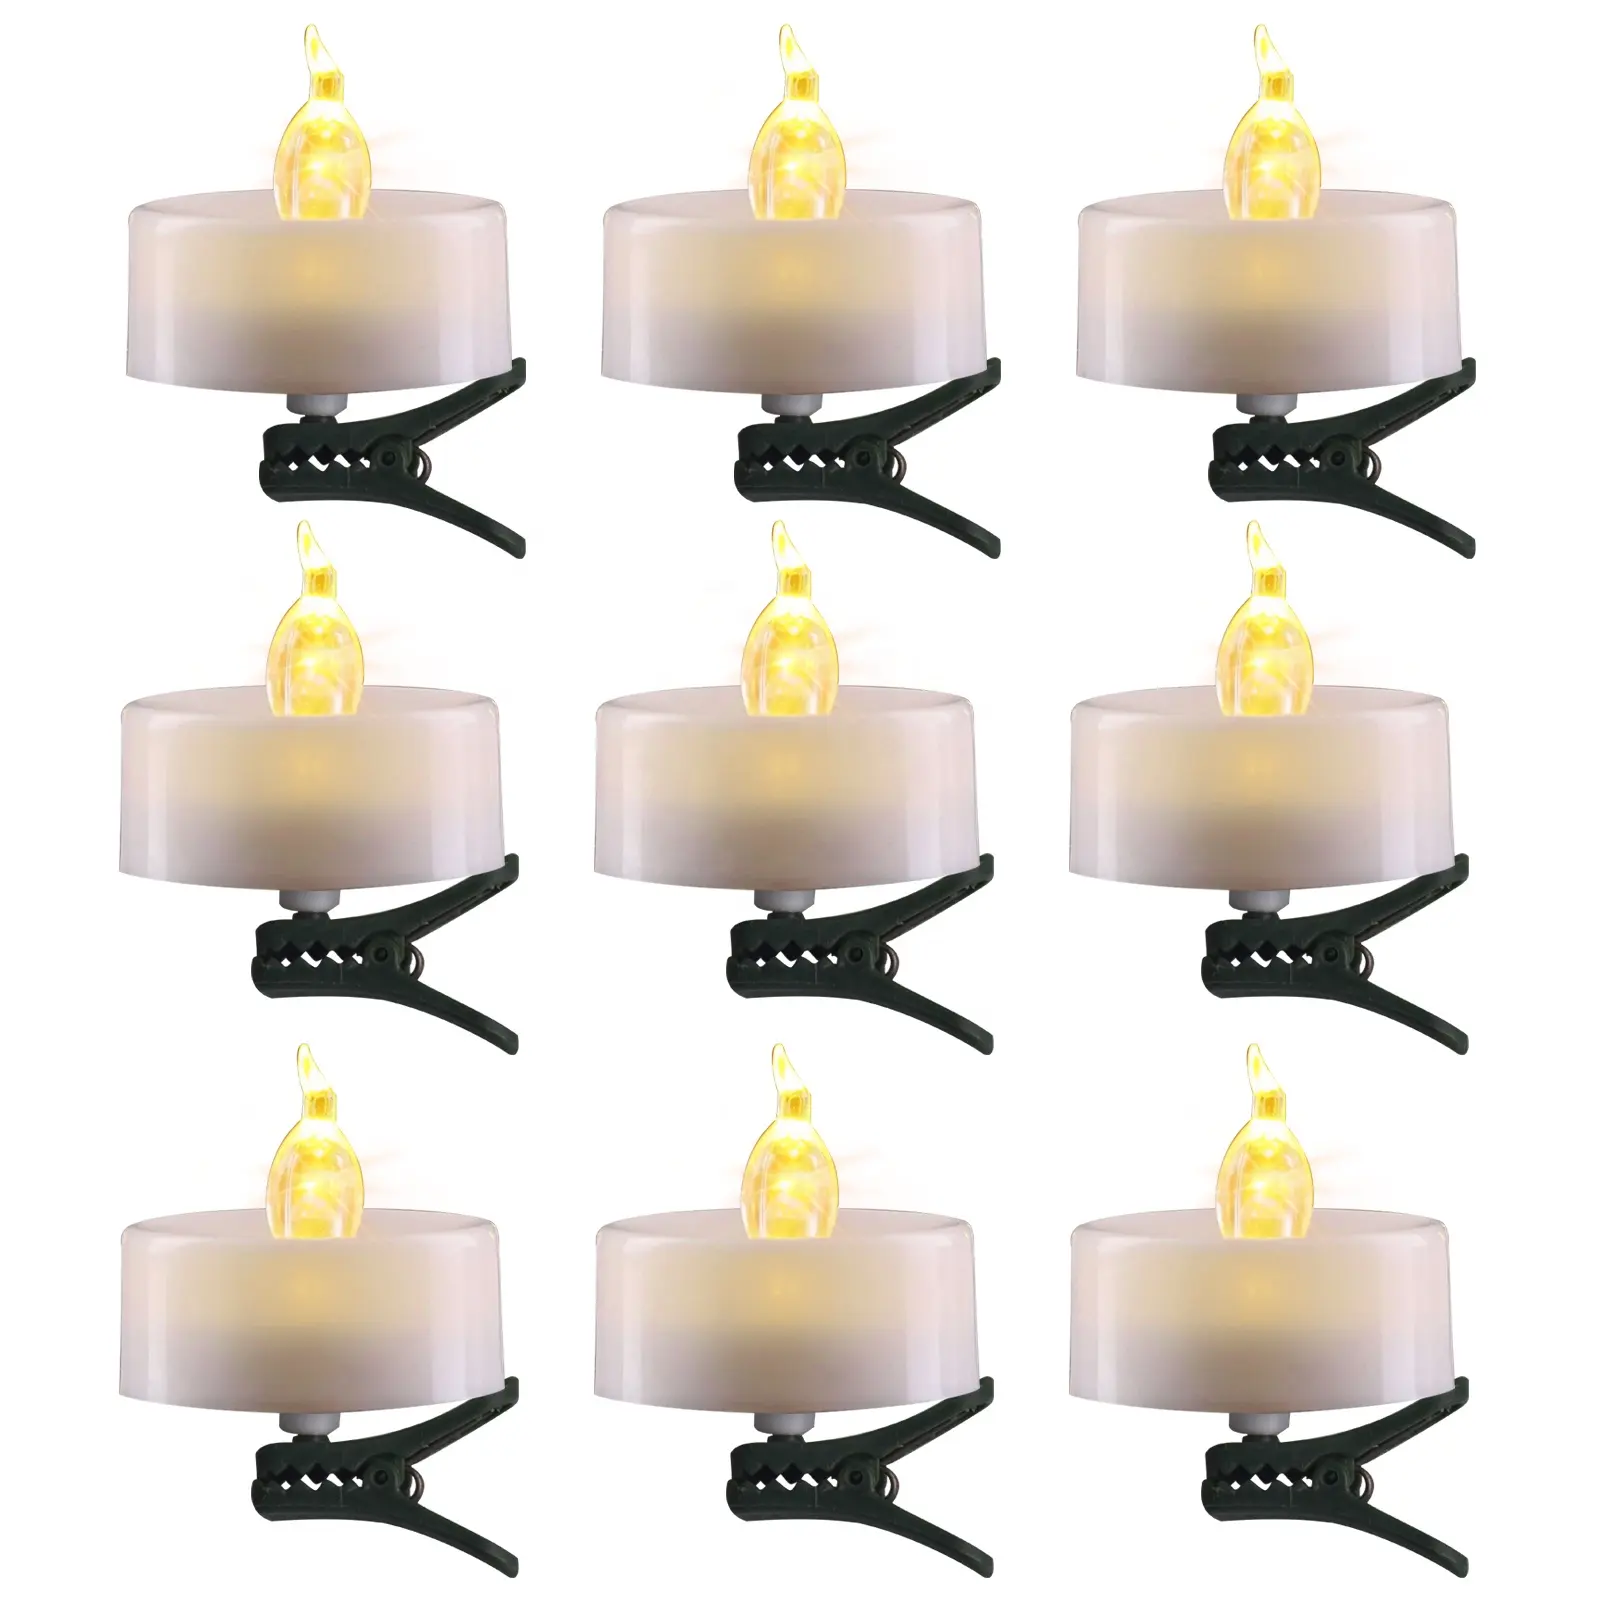 Creative 12pcs LED Tealight Candles Christmas Party Supplies Christmas Tree Decorations LED Electronic Candle Lights